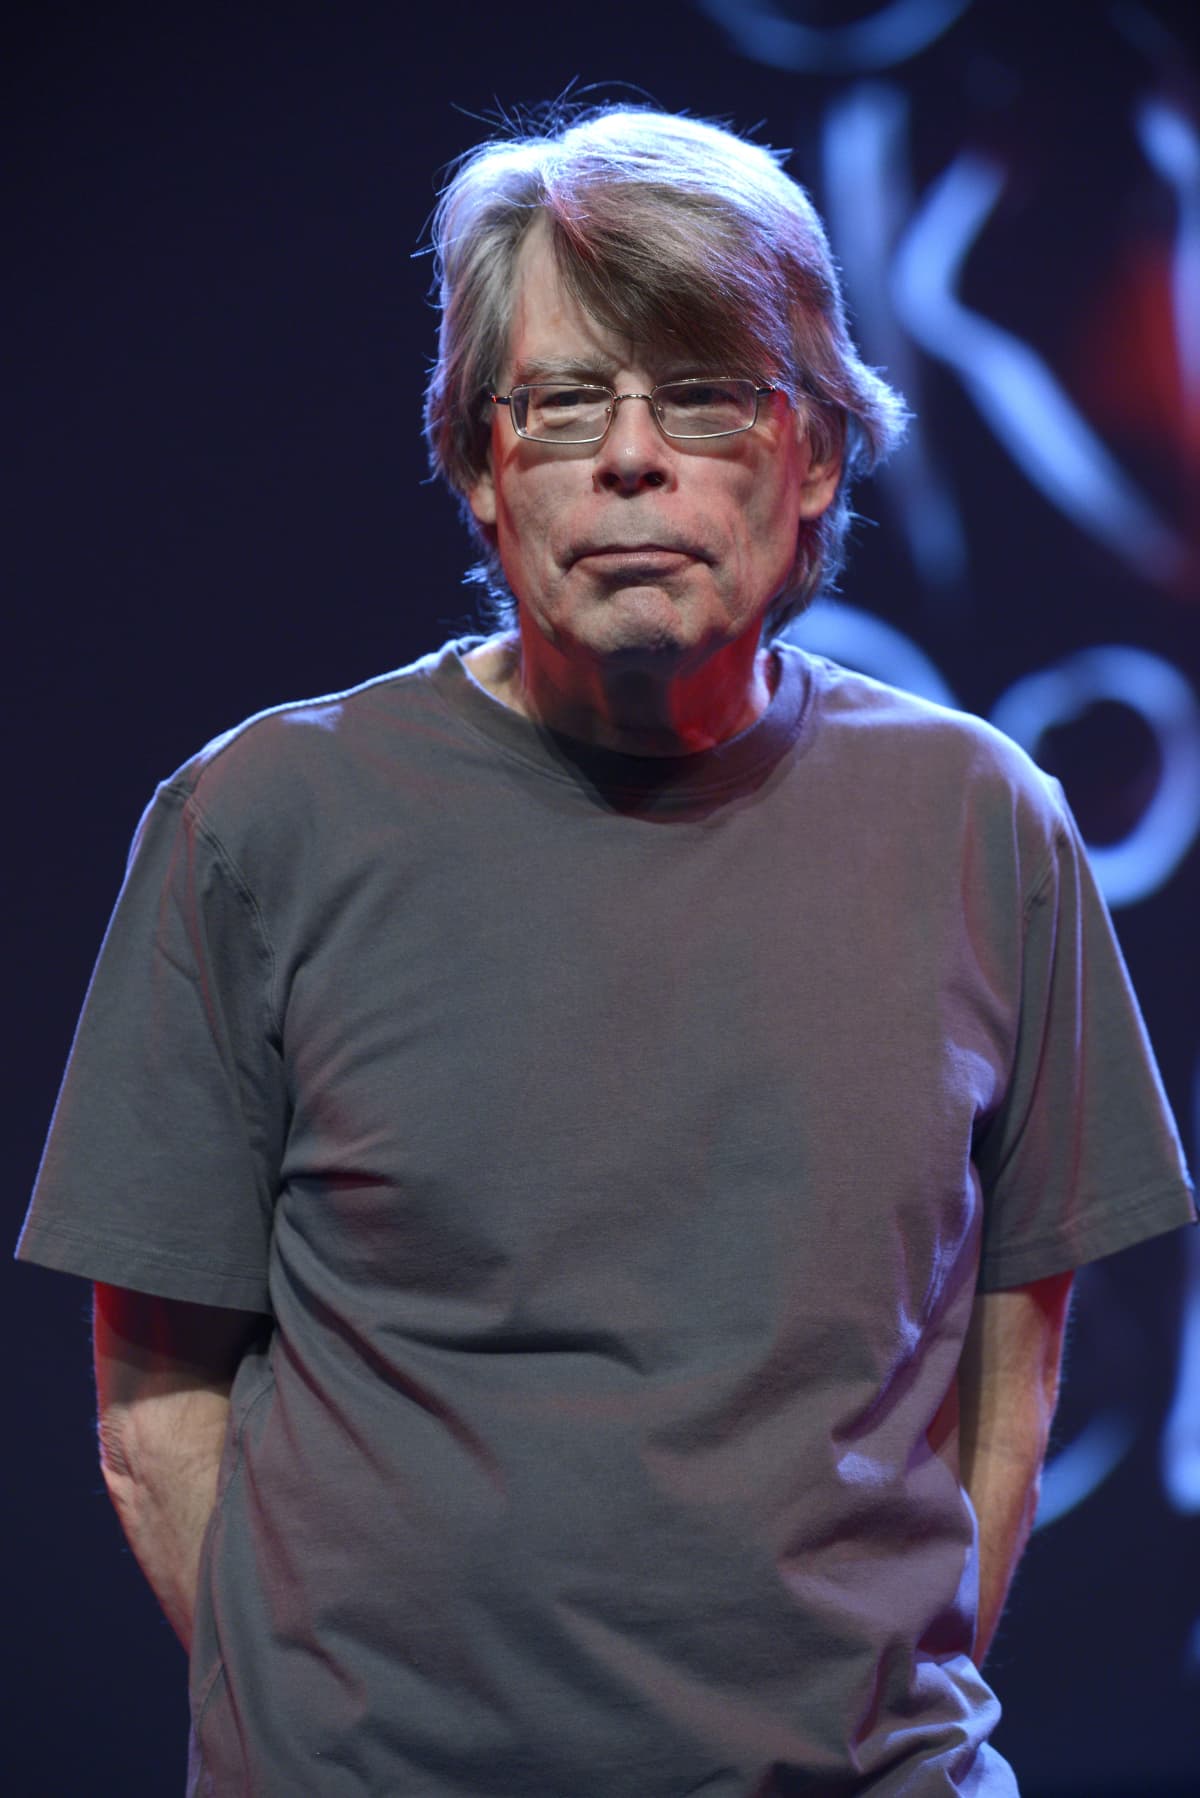 PARIS, FRANCE - NOVEMBER 16: American writer Stephen King poses during a portrait session held on November 16, 2013 in Paris, France. (Photo by Ulf Andersen/Getty Images)